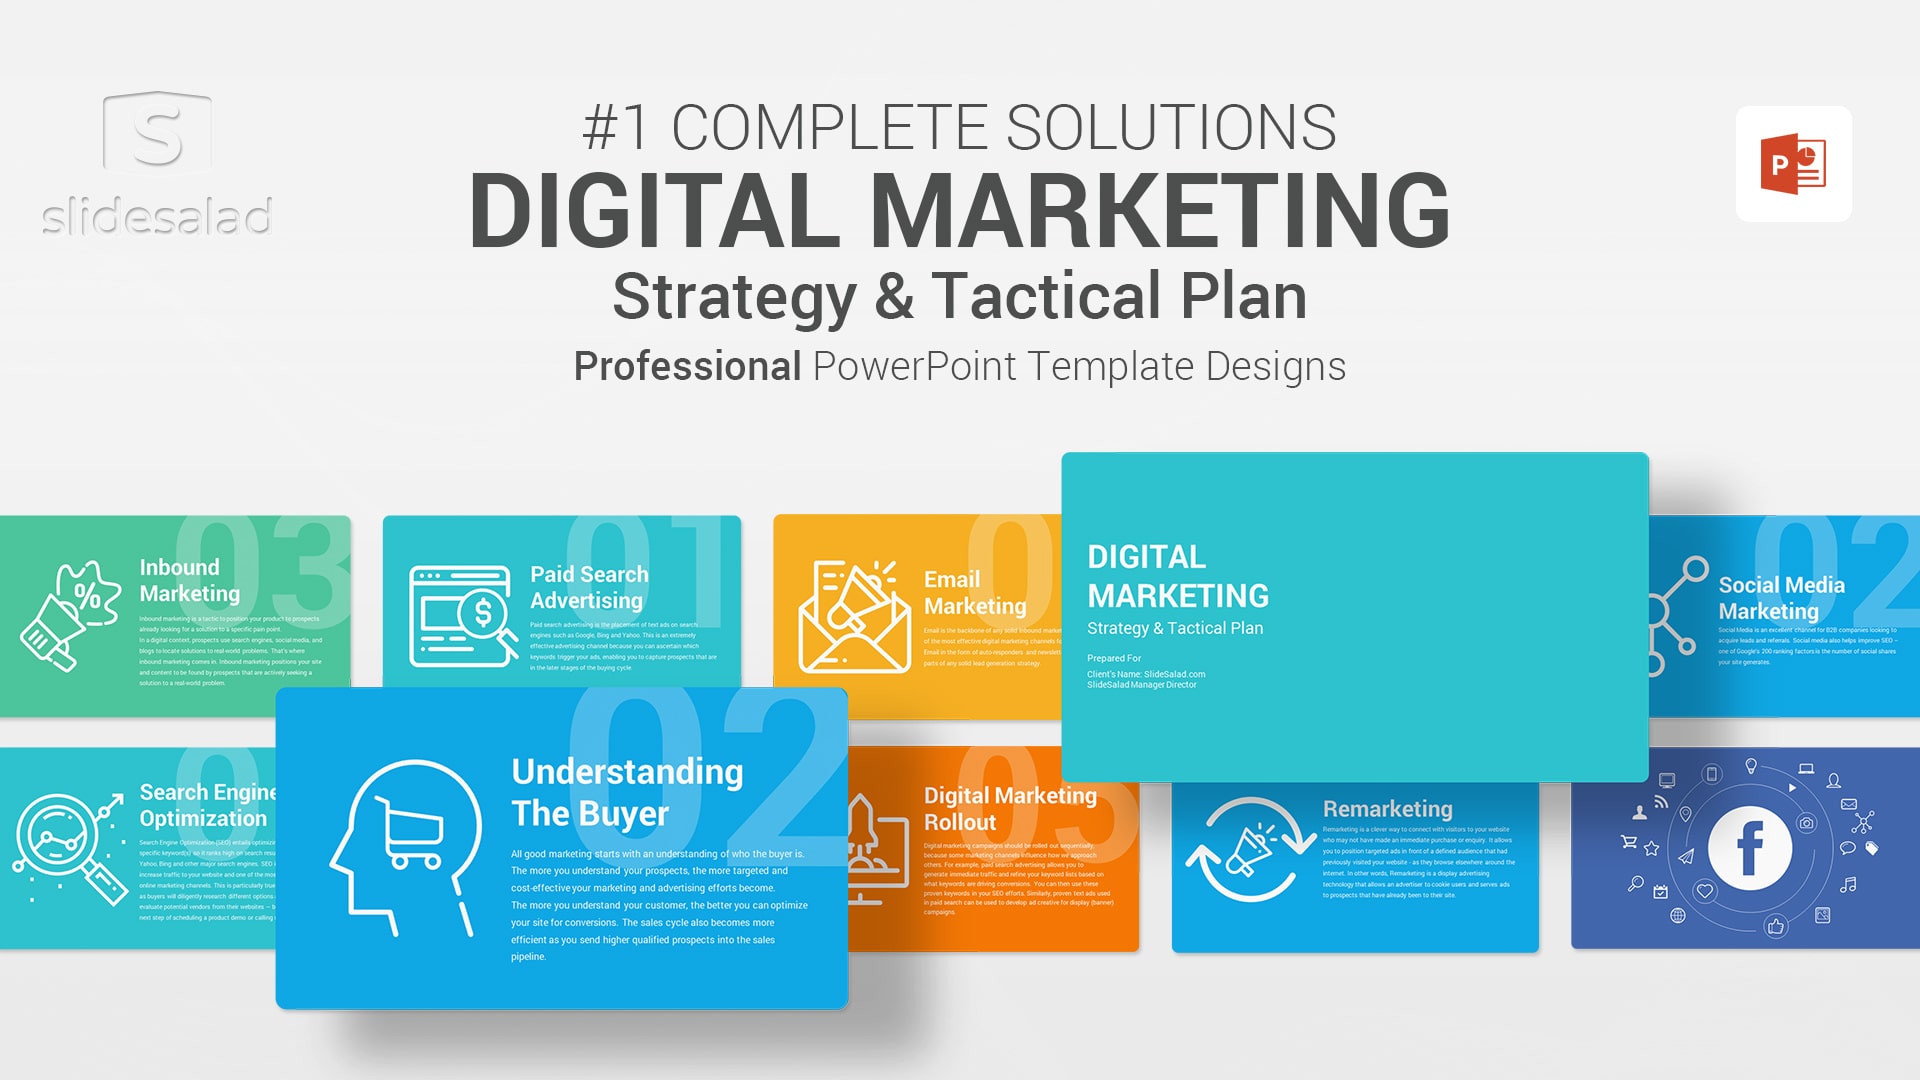 Digital Marketing PowerPoint (PPT) Template - All in One Online Marketing PPT Template Designs